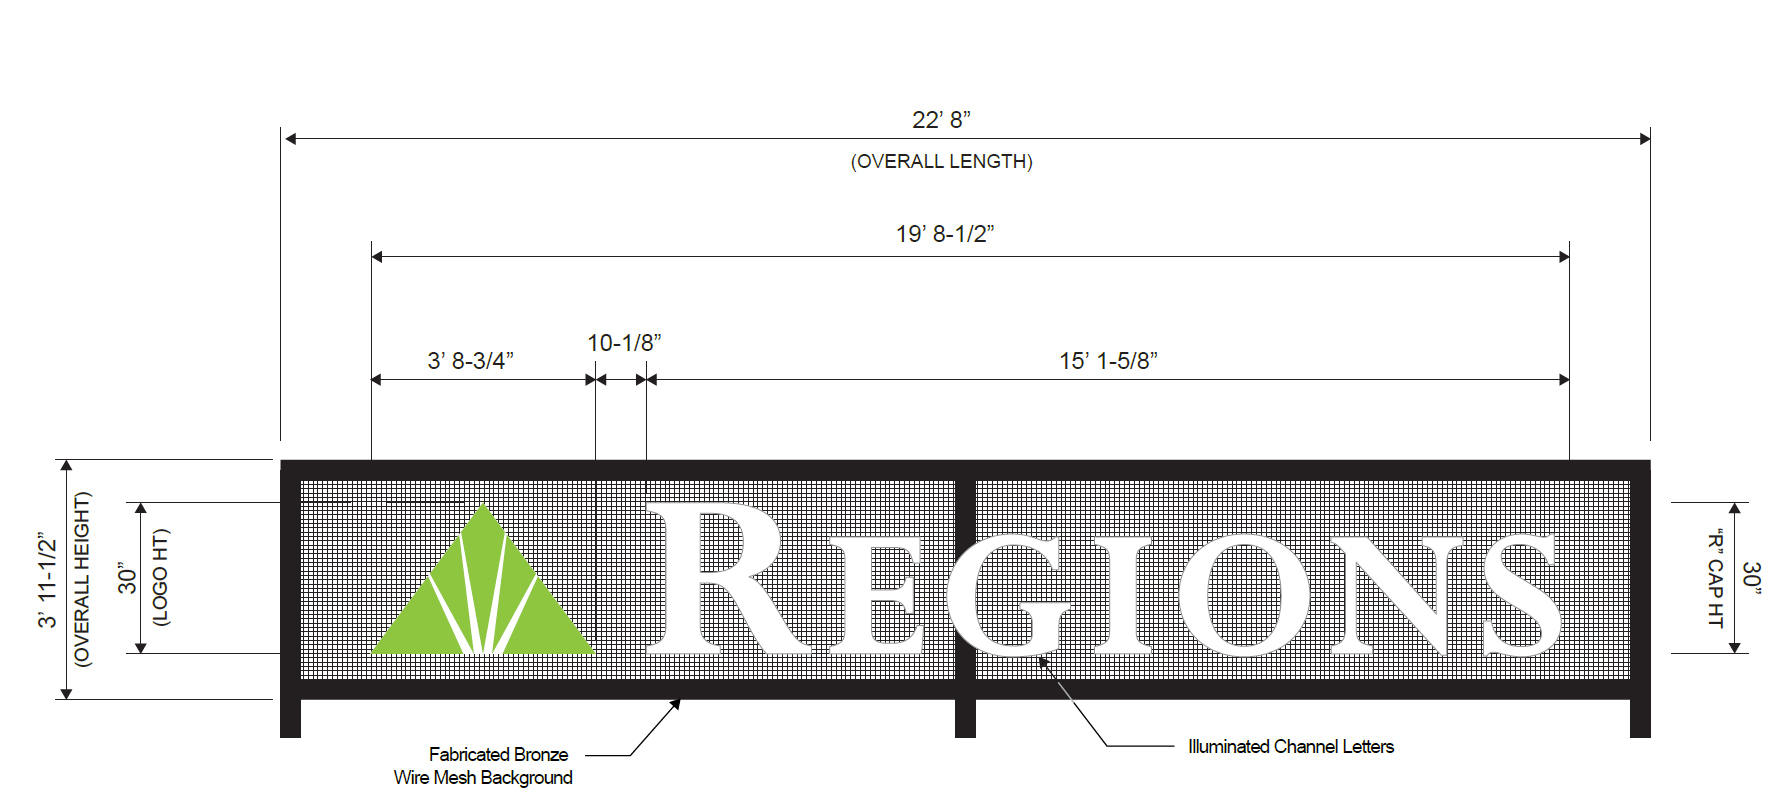 Regions reduced the proposed size of its rooftop sign by 59.32 square feet.